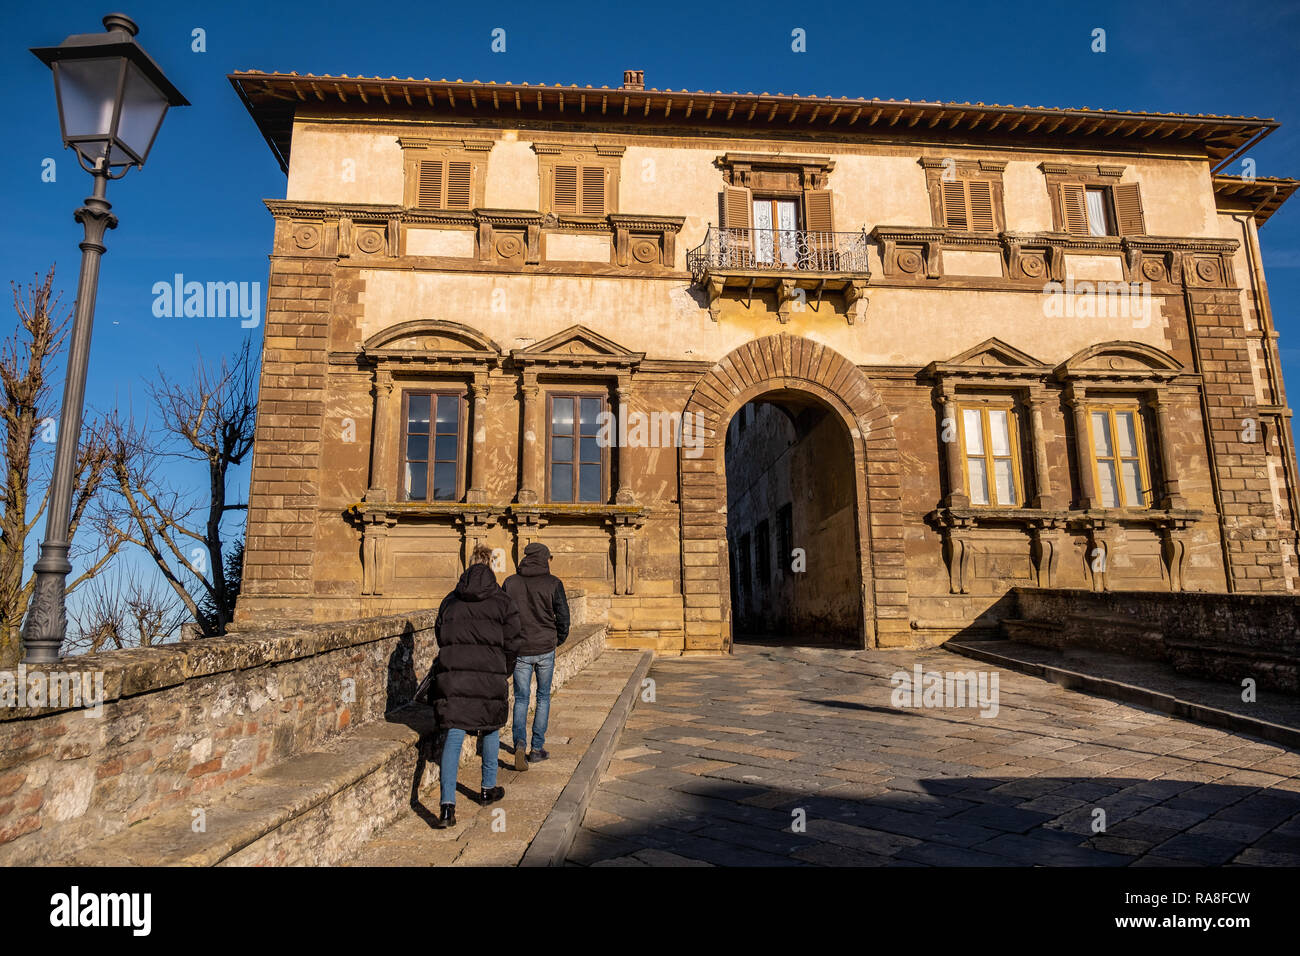 COLLE VAL D’ELSA, ITALY - DECEMBER 26, 2018: Palazzo Campana, the gateway to the oldest part of the town of Colle Val d'Elsa, Siena, Tuscany Stock Photo